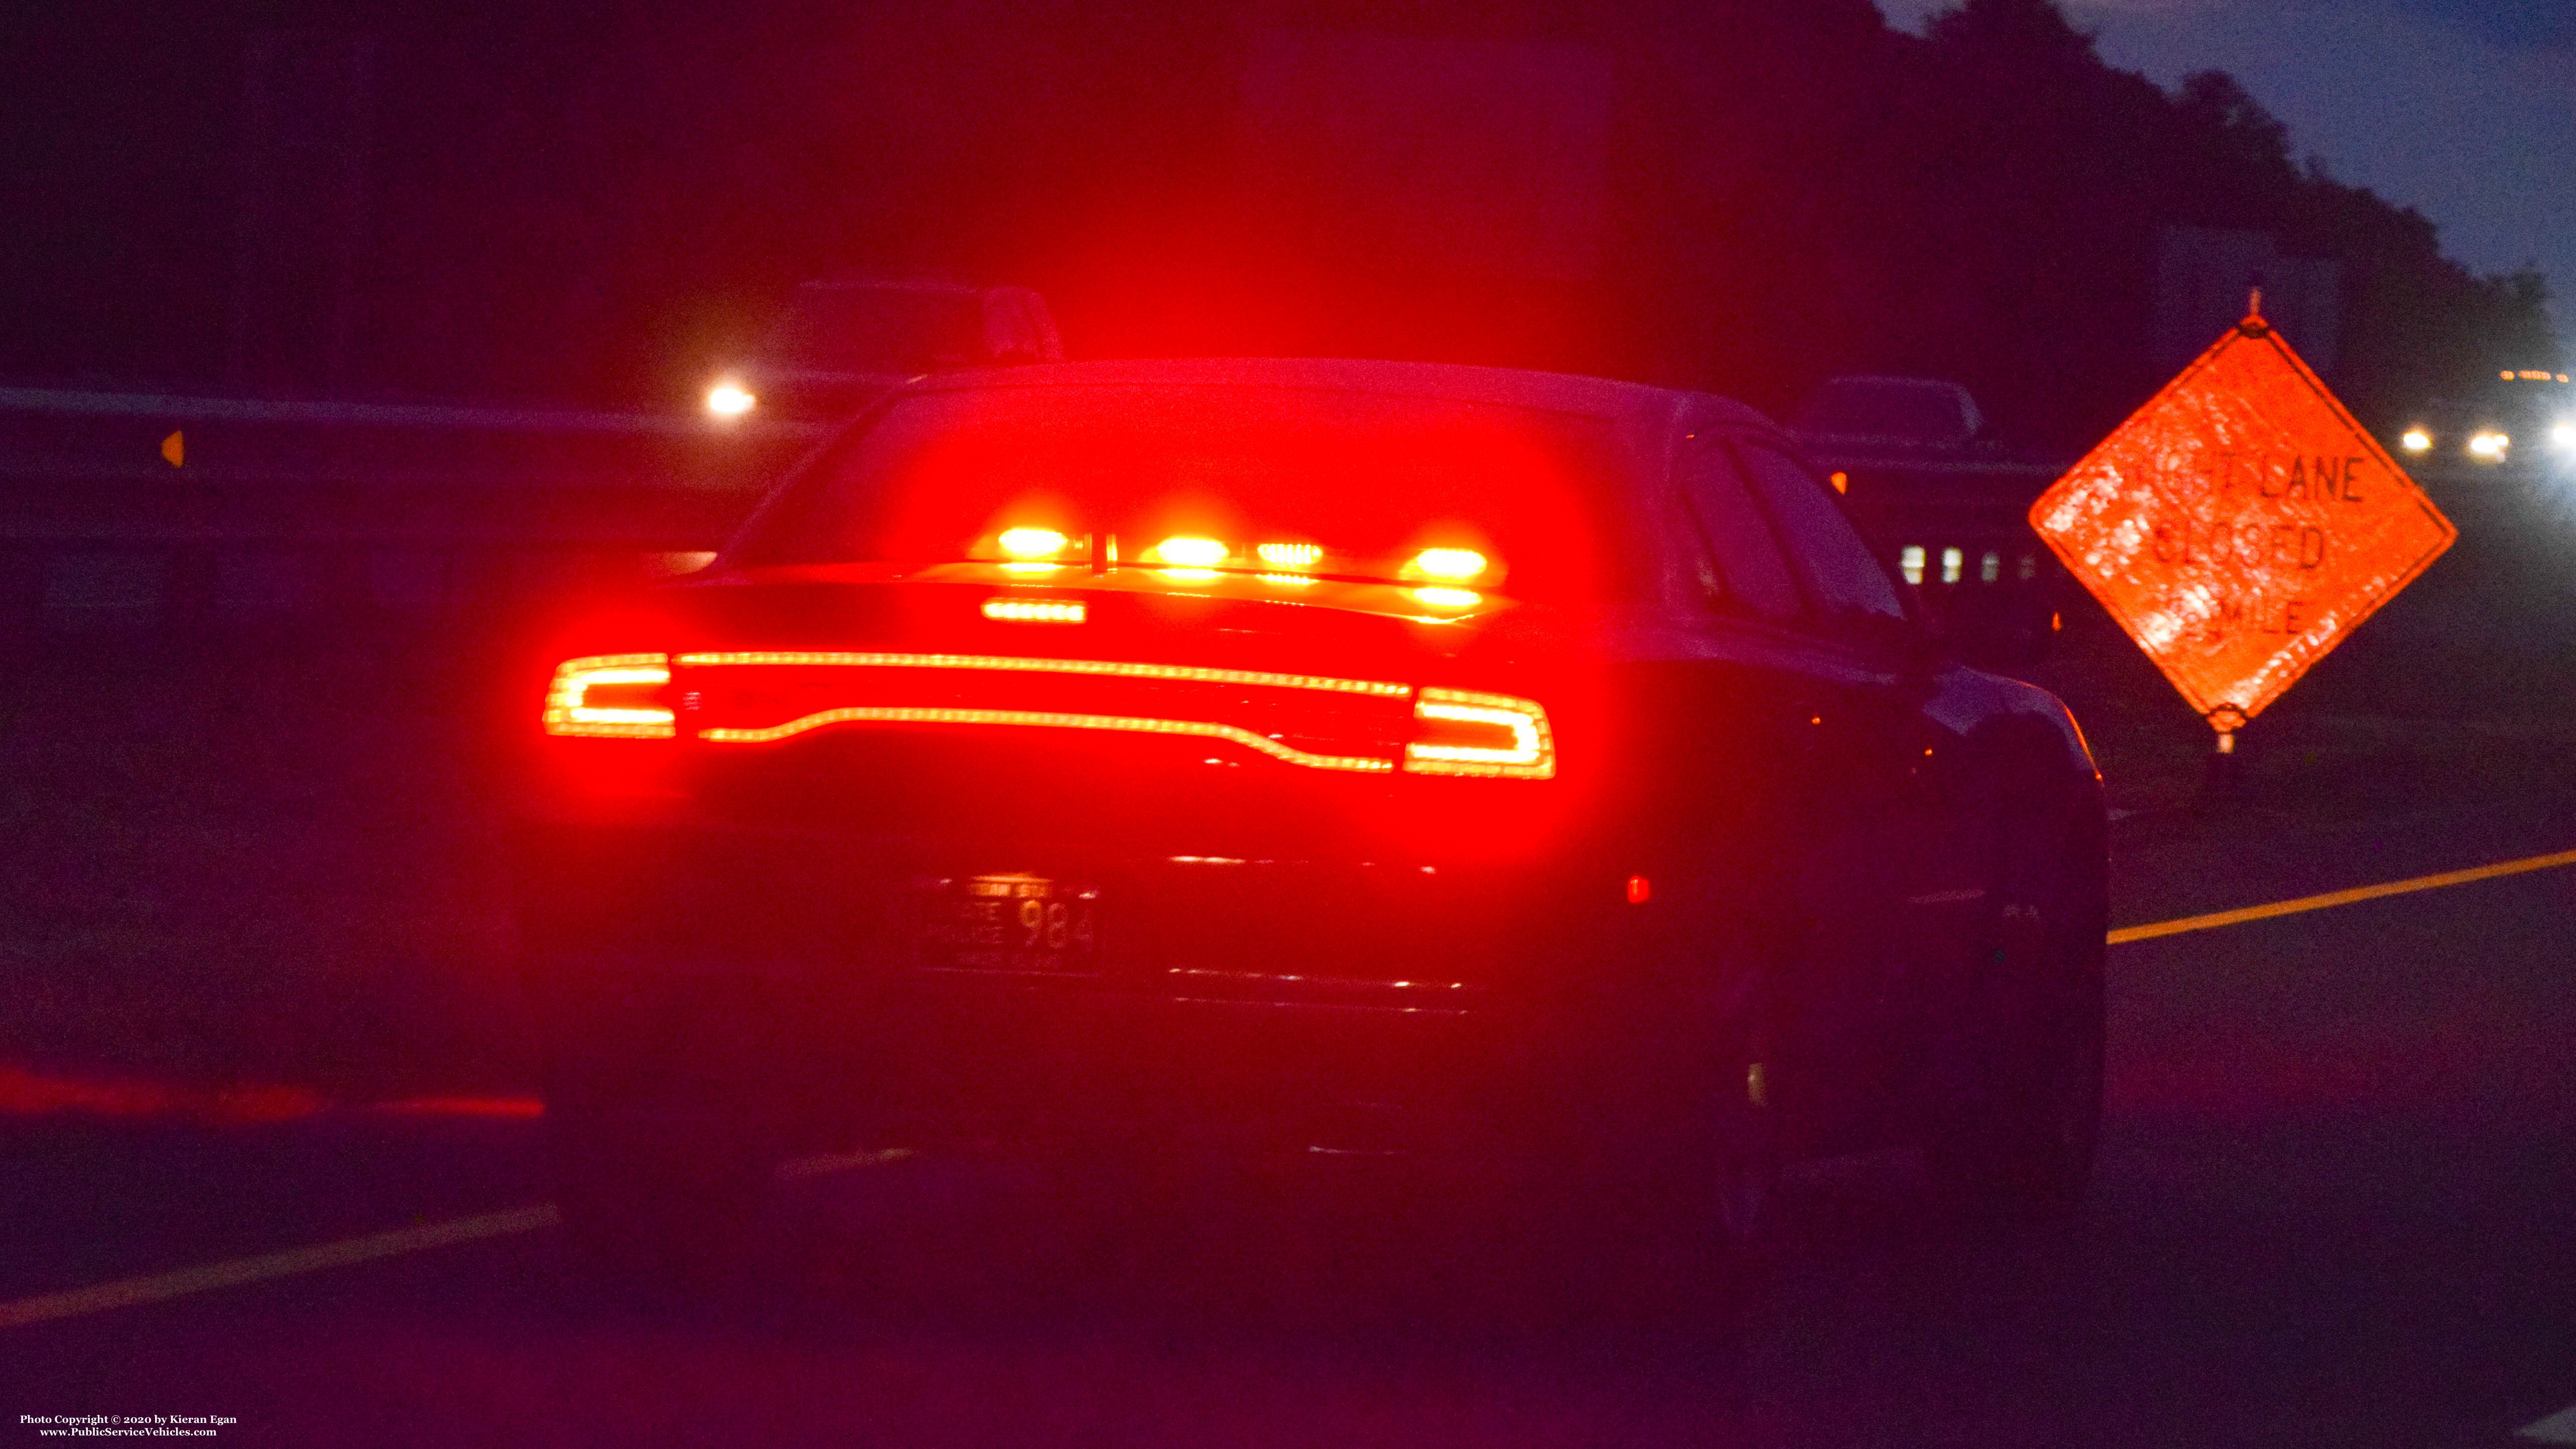 A photo  of Rhode Island State Police
            Cruiser 984, a 2013 Dodge Charger             taken by Kieran Egan